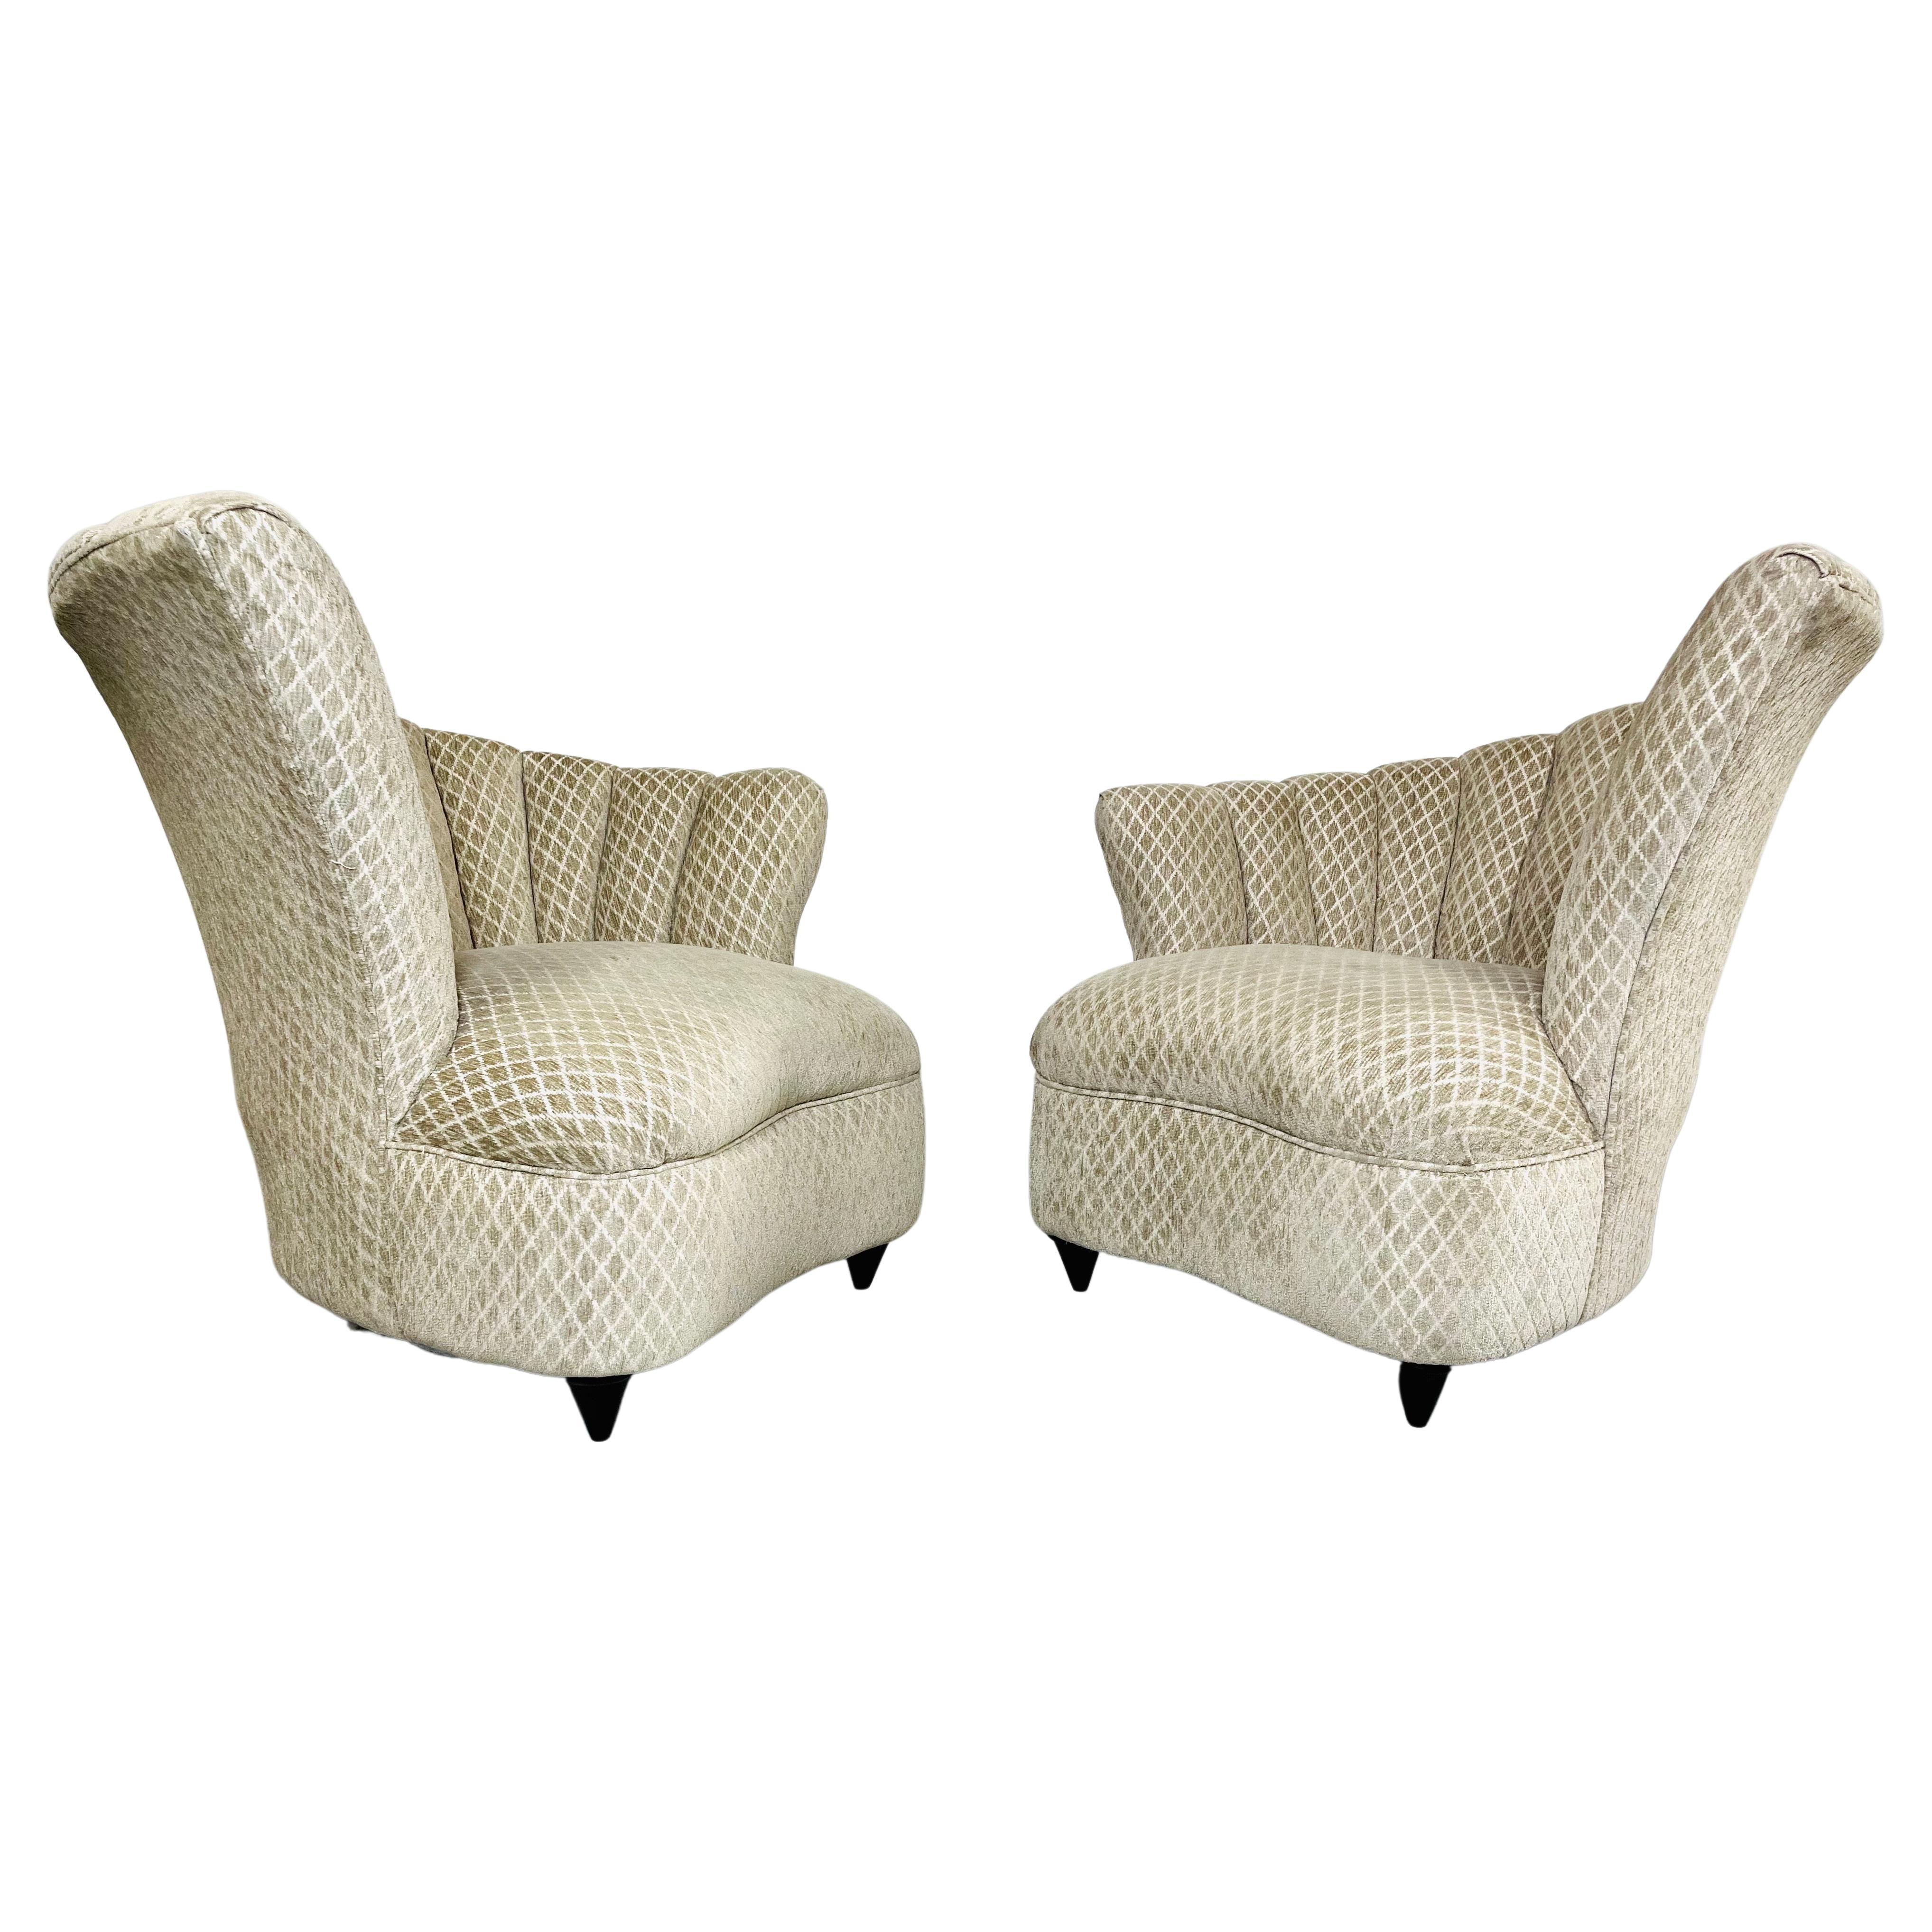 Pair of Hollywood Regency Curved Shell Channel Back Lounge Chairs